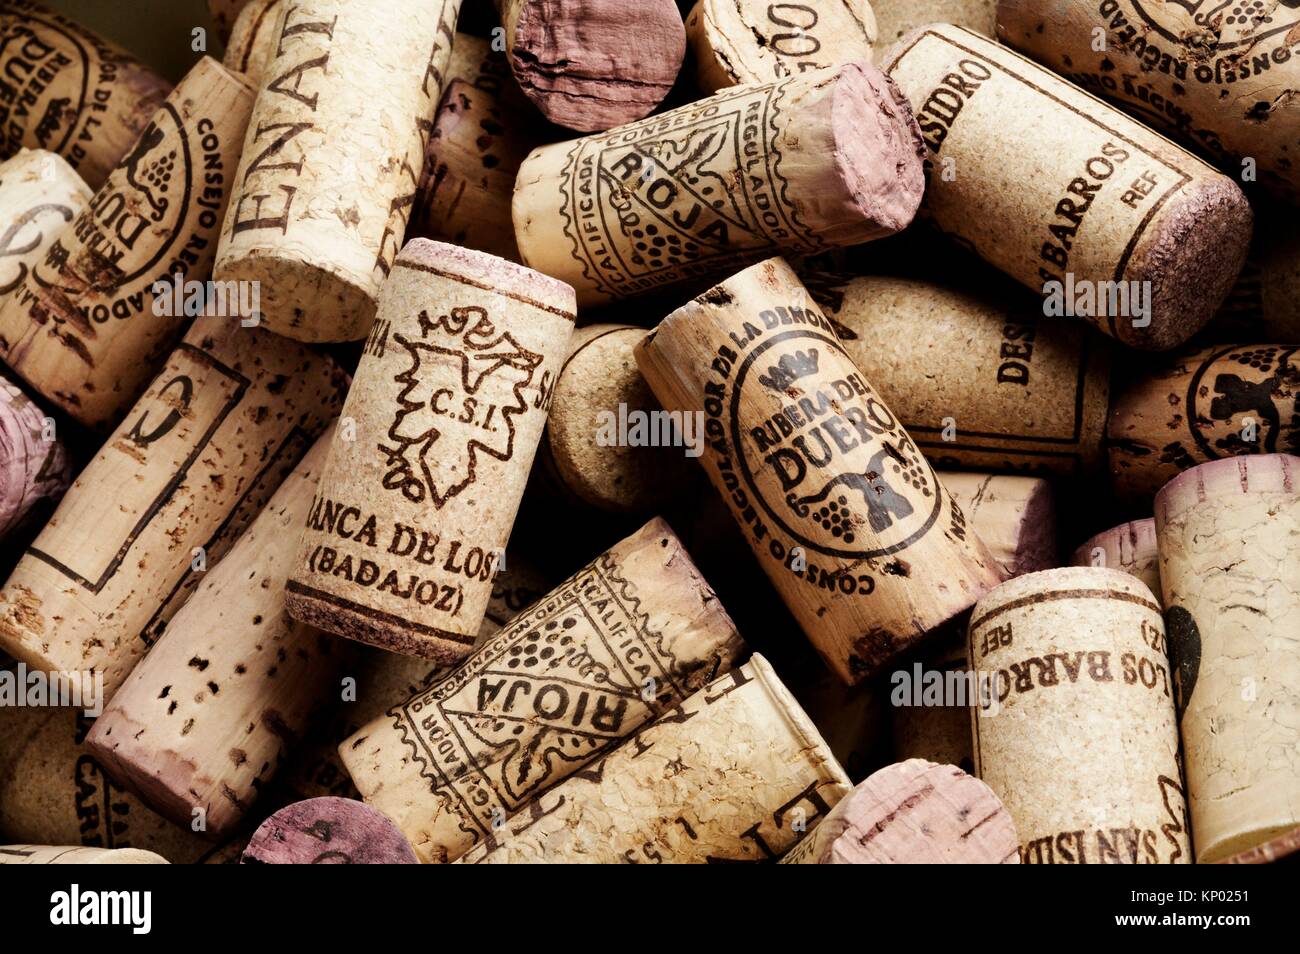 Close-up of cork stoppers from different D.O.(Qualified Designation of Origin). Stock Photo